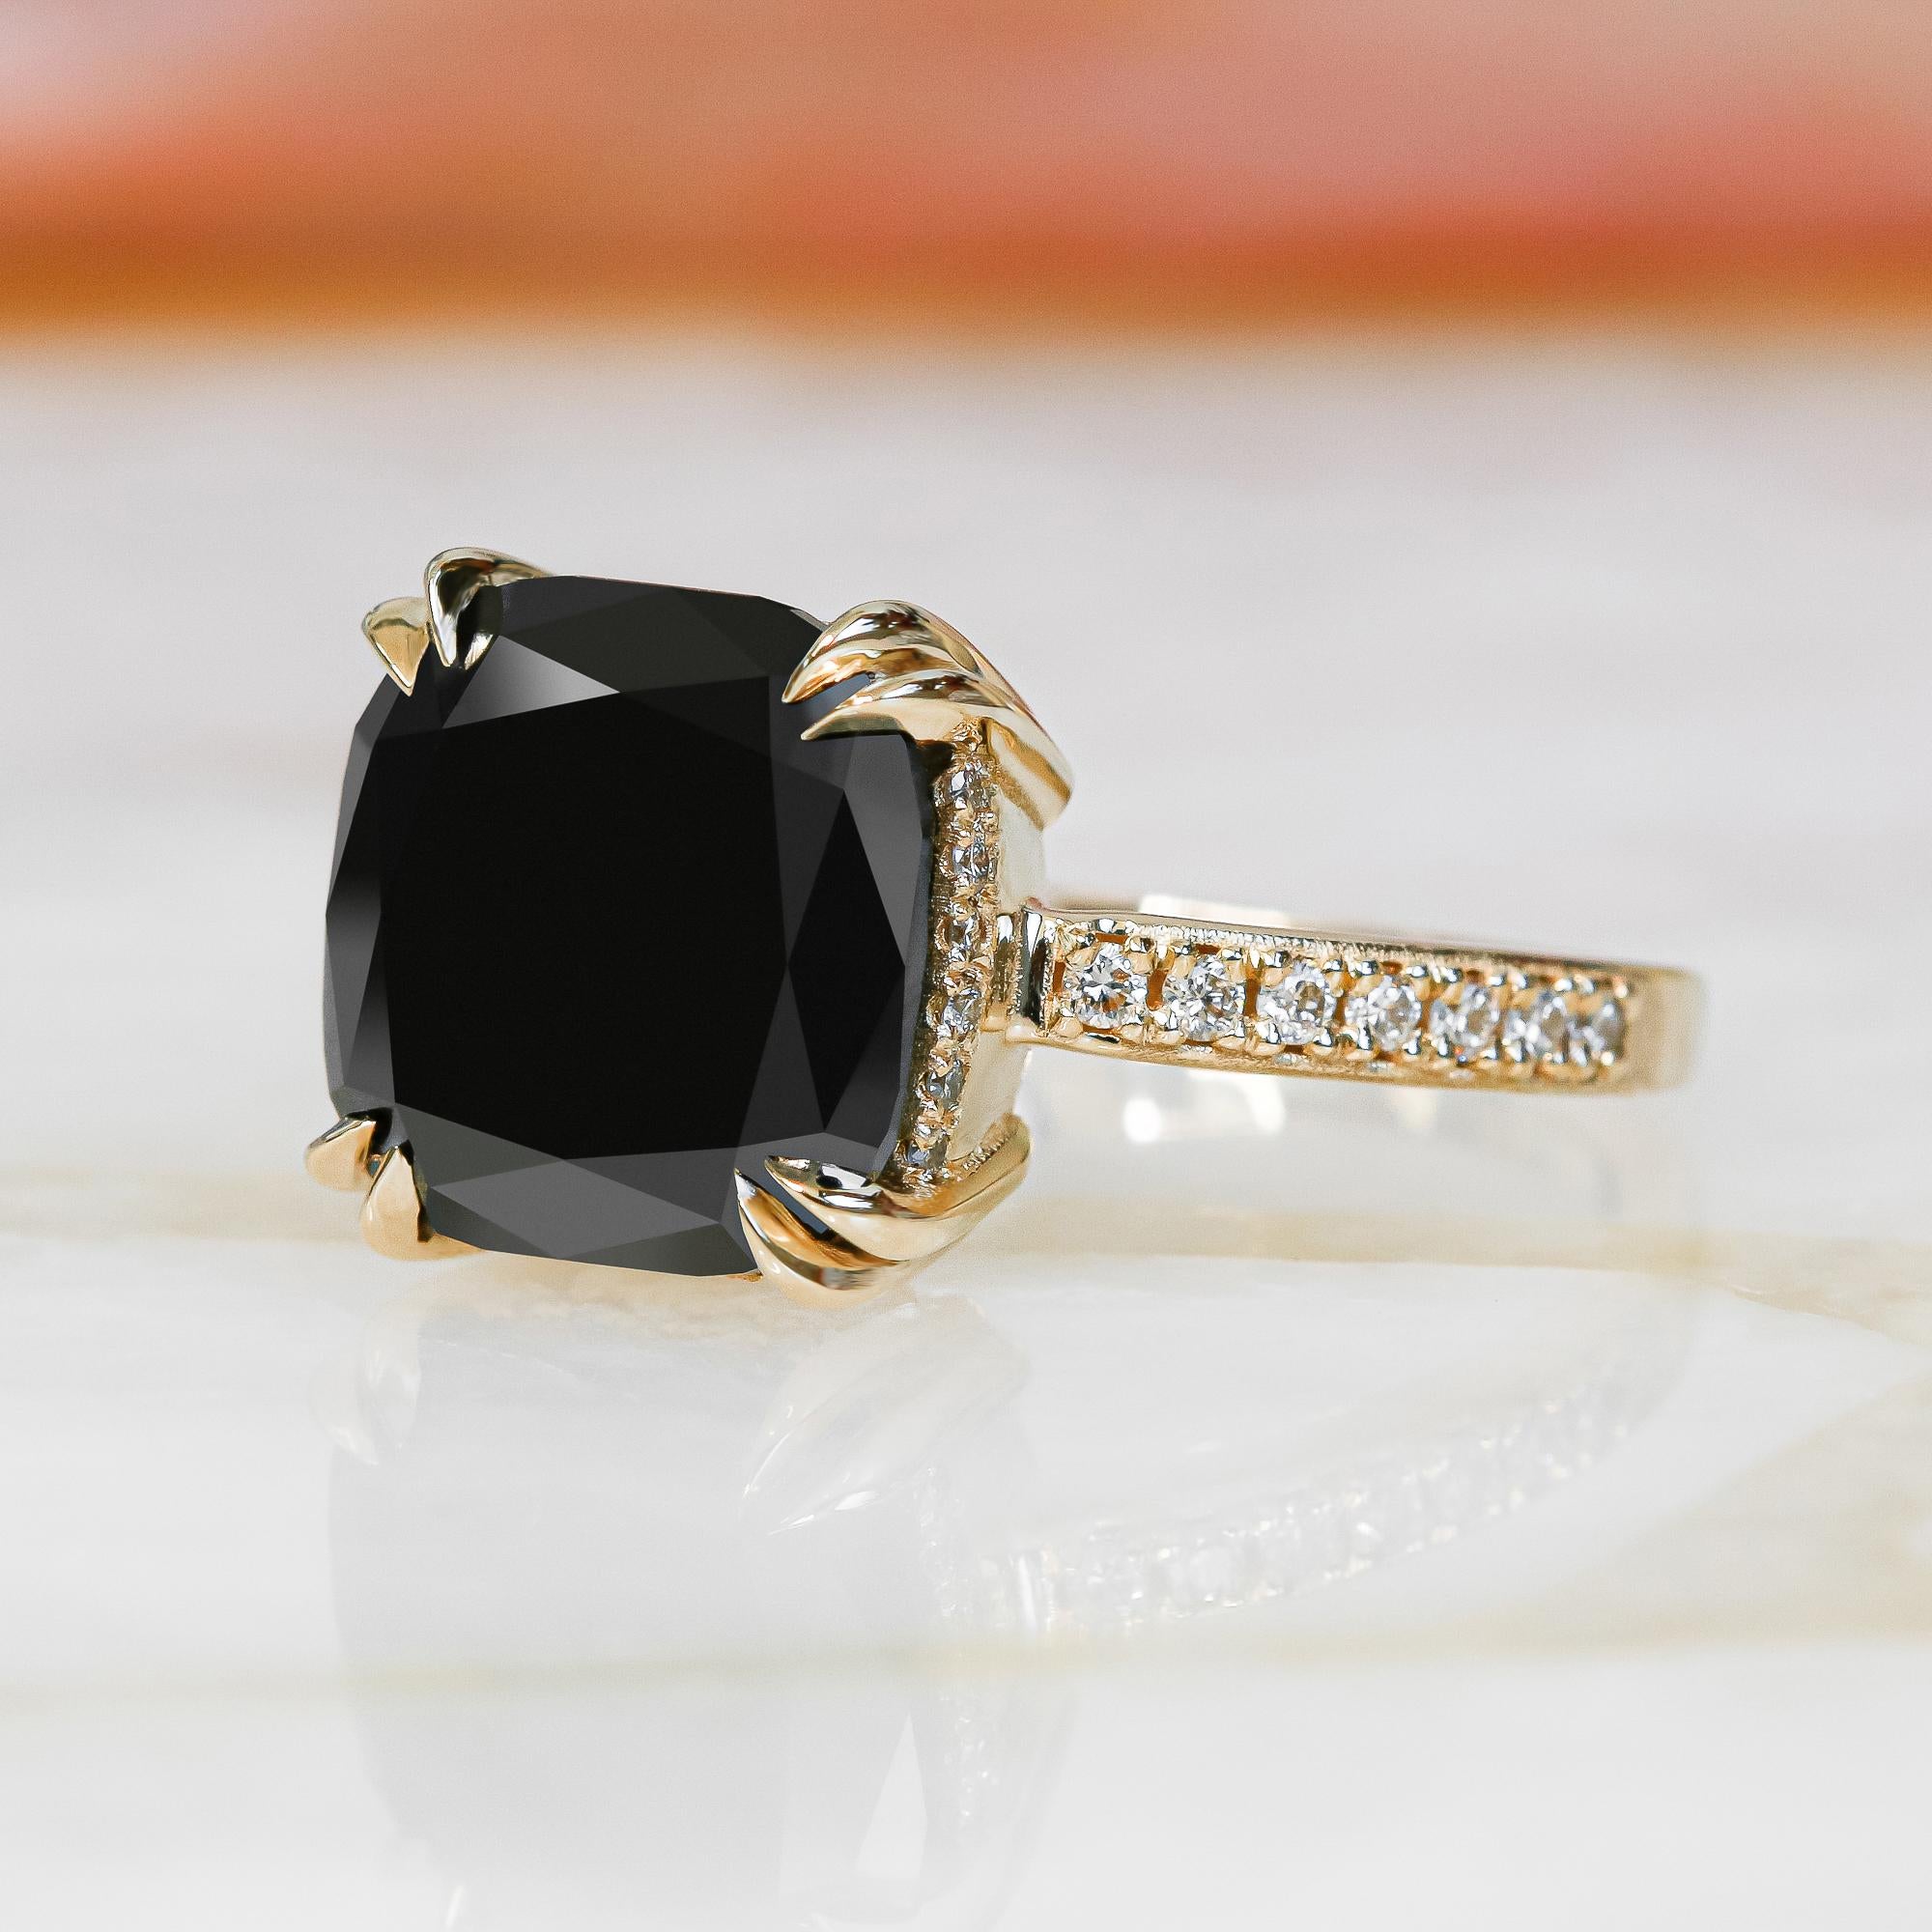 -Total Carat Weight: 4.89  Carats
-14K yellow Gold
-Size: Resizable

Notes:
- All diamonds are natural, earth-mined diamonds that were suitable for Color Enhancement into Fancy Black color.
- All Jewelry are made to order hence any size and gold